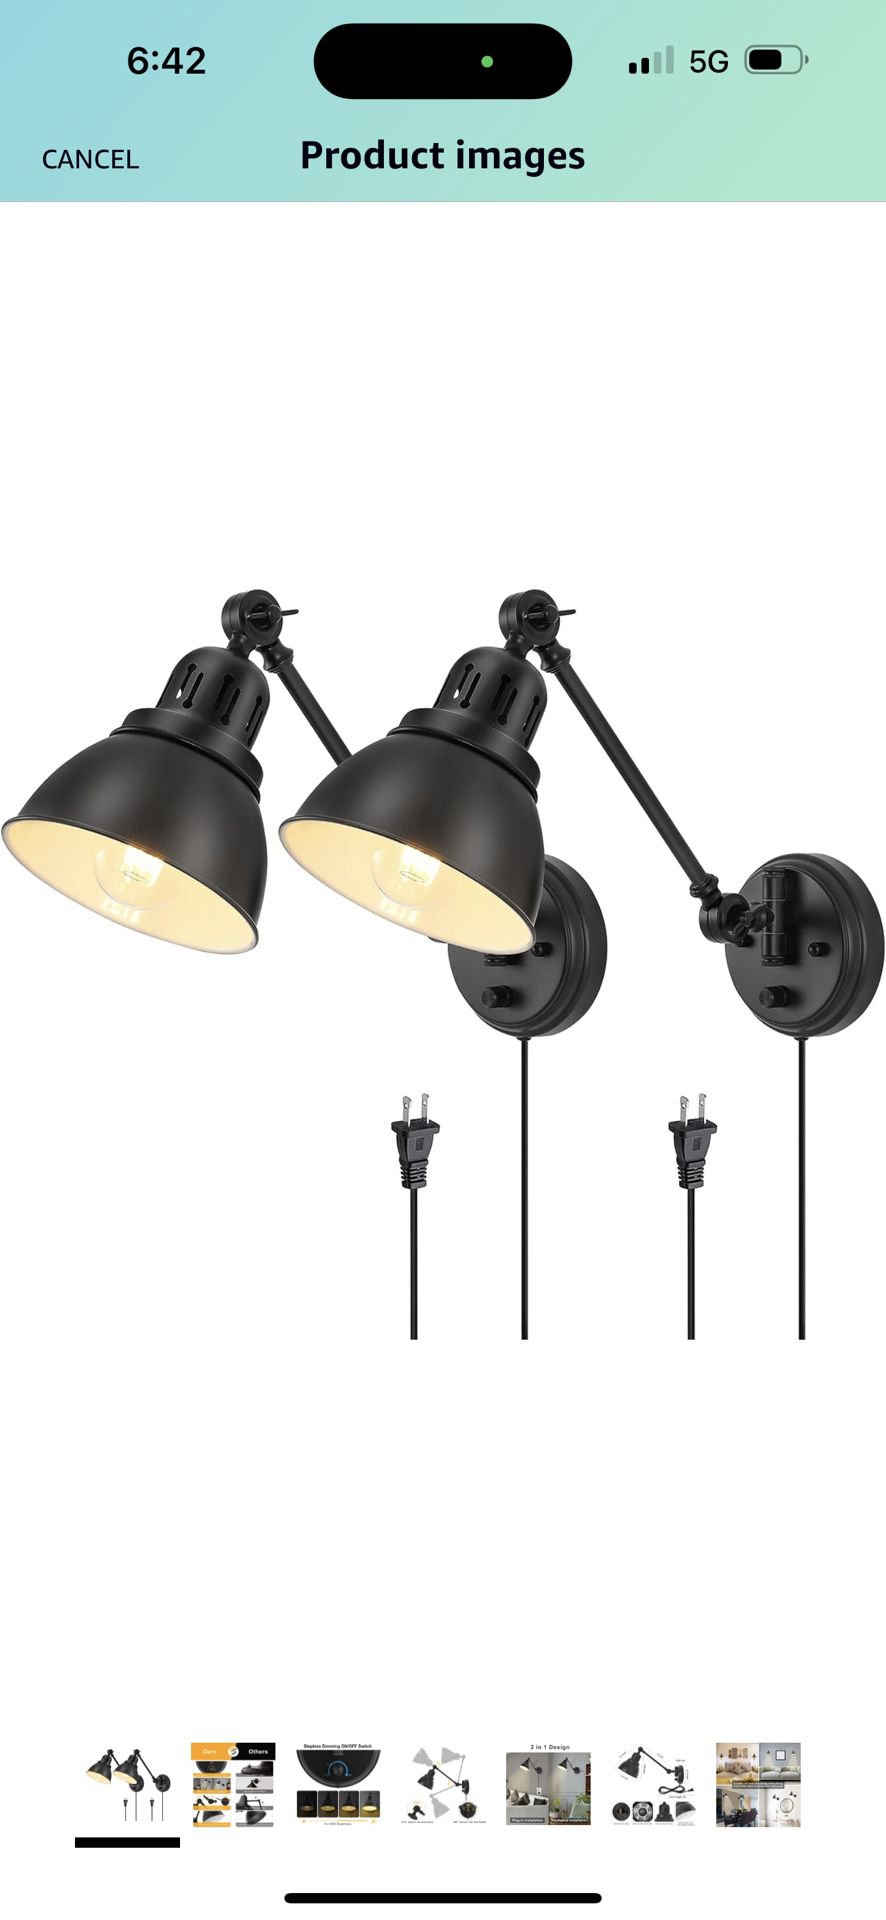 Plug in Wall Sconces Set of 2, Wall Sconce Lighting with Dimmable On Off Switch, Swing Arm Wall Lamp, Black Metal Industrial Wall Light Fixtures, Safe